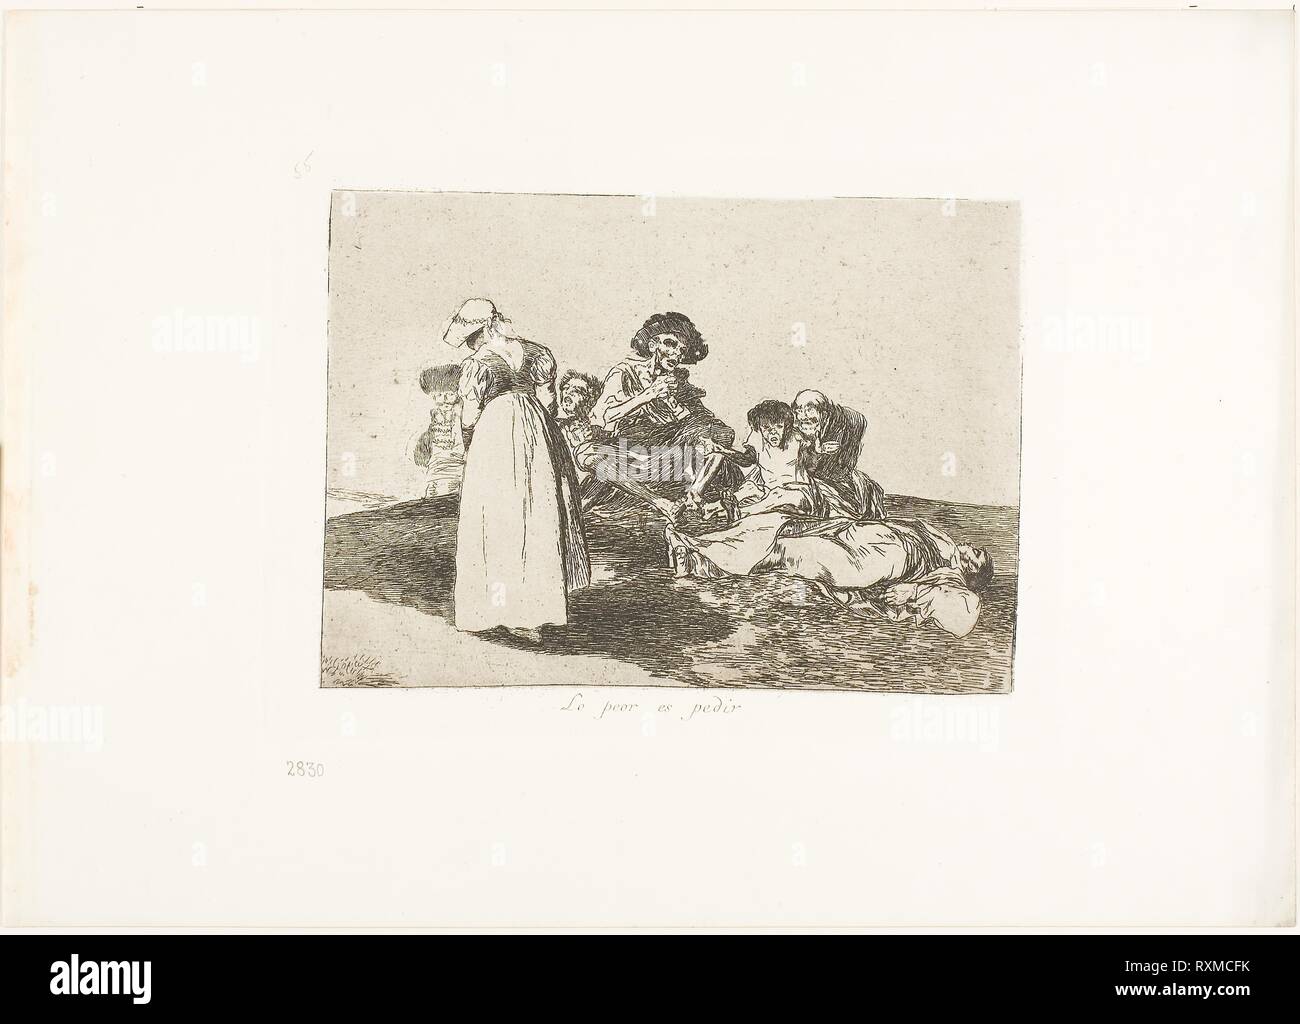 The Worst is to Beg, plate 55 from The Disasters of War. Francisco José de Goya y Lucientes; Spanish, 1746-1828. Date: 1812-1815. Dimensions: 130 x 181 mm (image); 155 x 205 mm (plate); 240 x 340 mm (sheet). Etching, lavis and burnishing on ivory wove paper with gilt edges. Origin: Spain. Museum: The Chicago Art Institute. Stock Photo